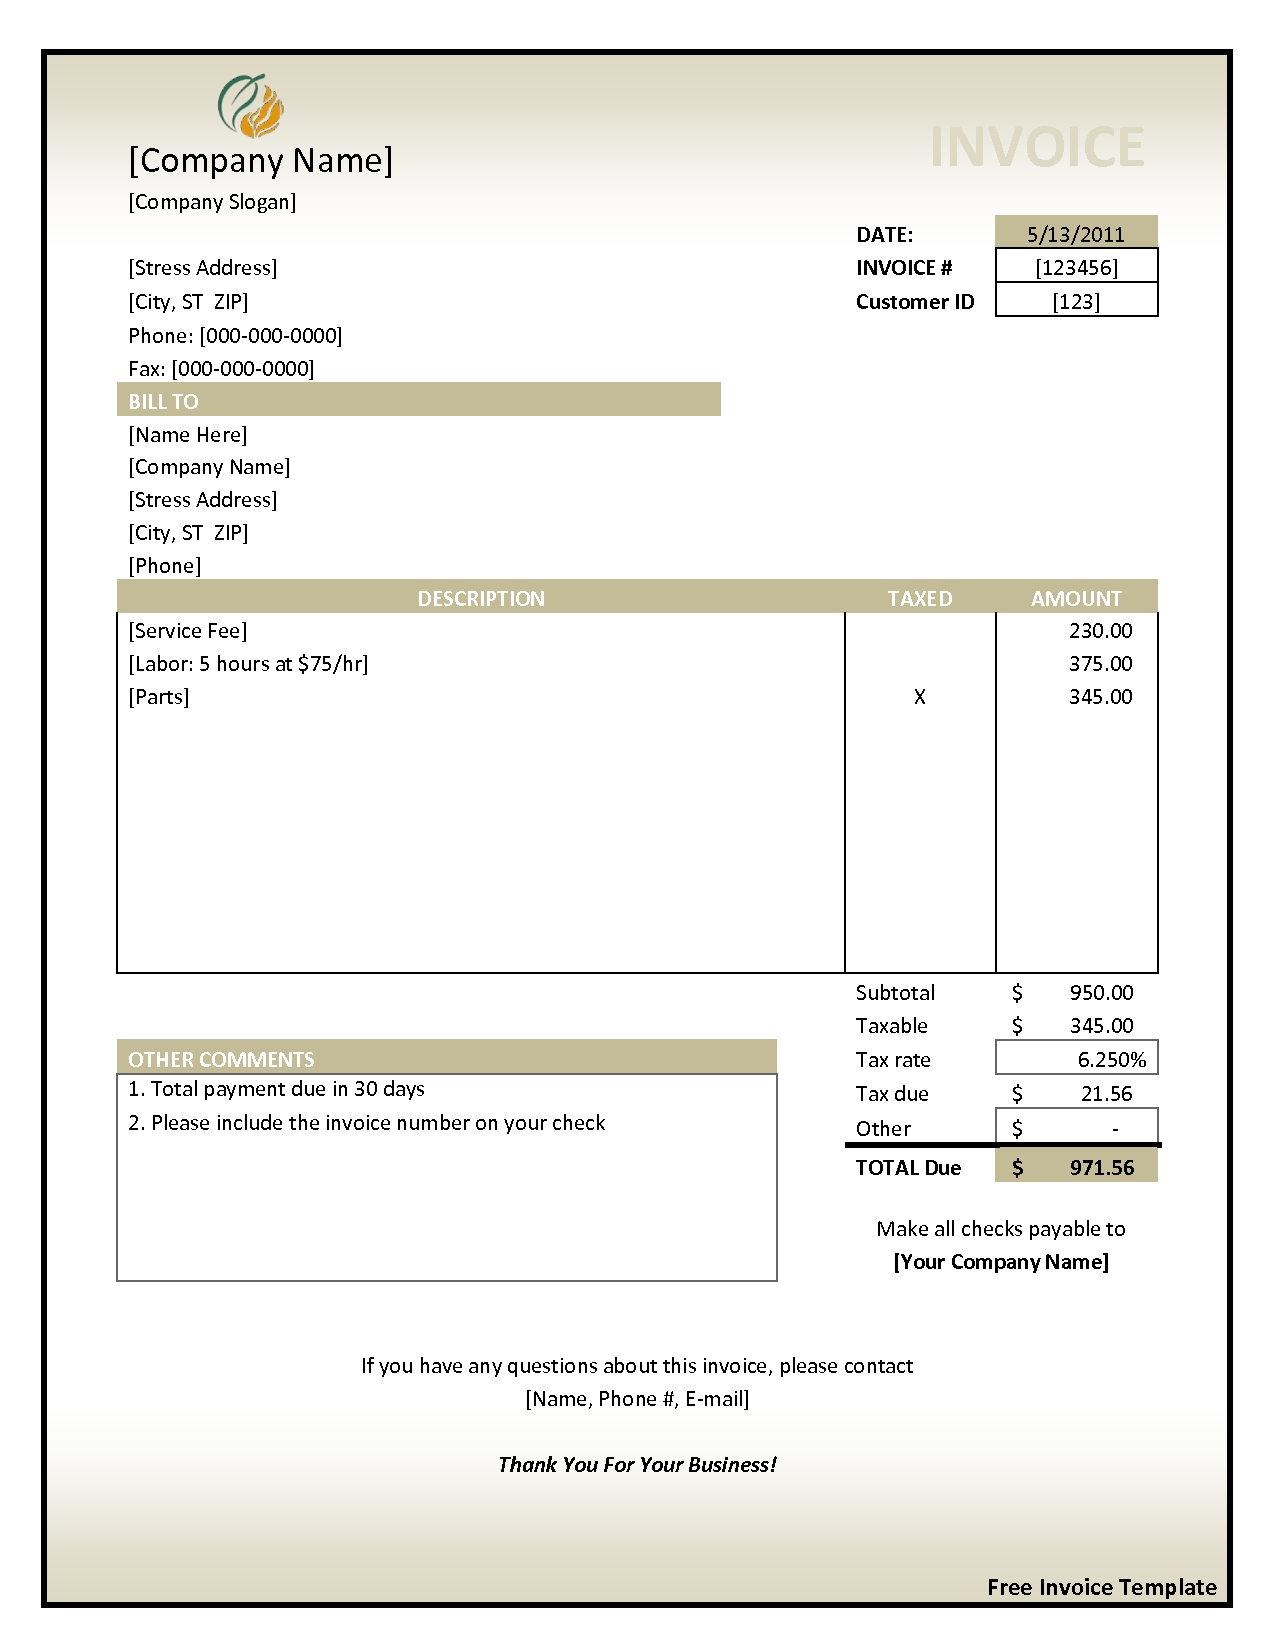 download free invoice template free business template invoice templates free download